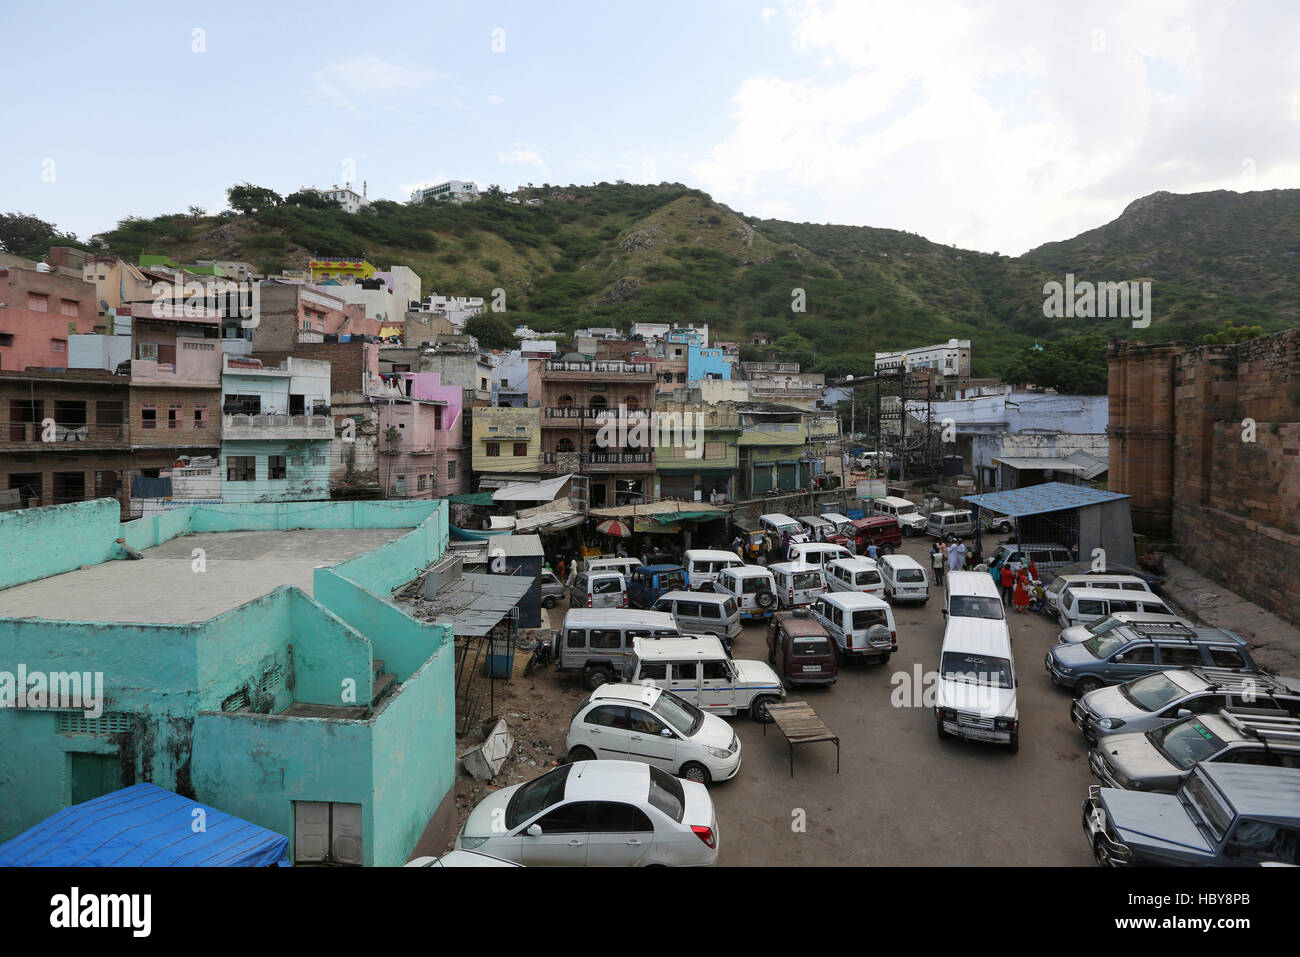 View of car parking area and city houses from Adhai Din Ka Jhonpra in Ajmer, Rajasthan, India Stock Photo